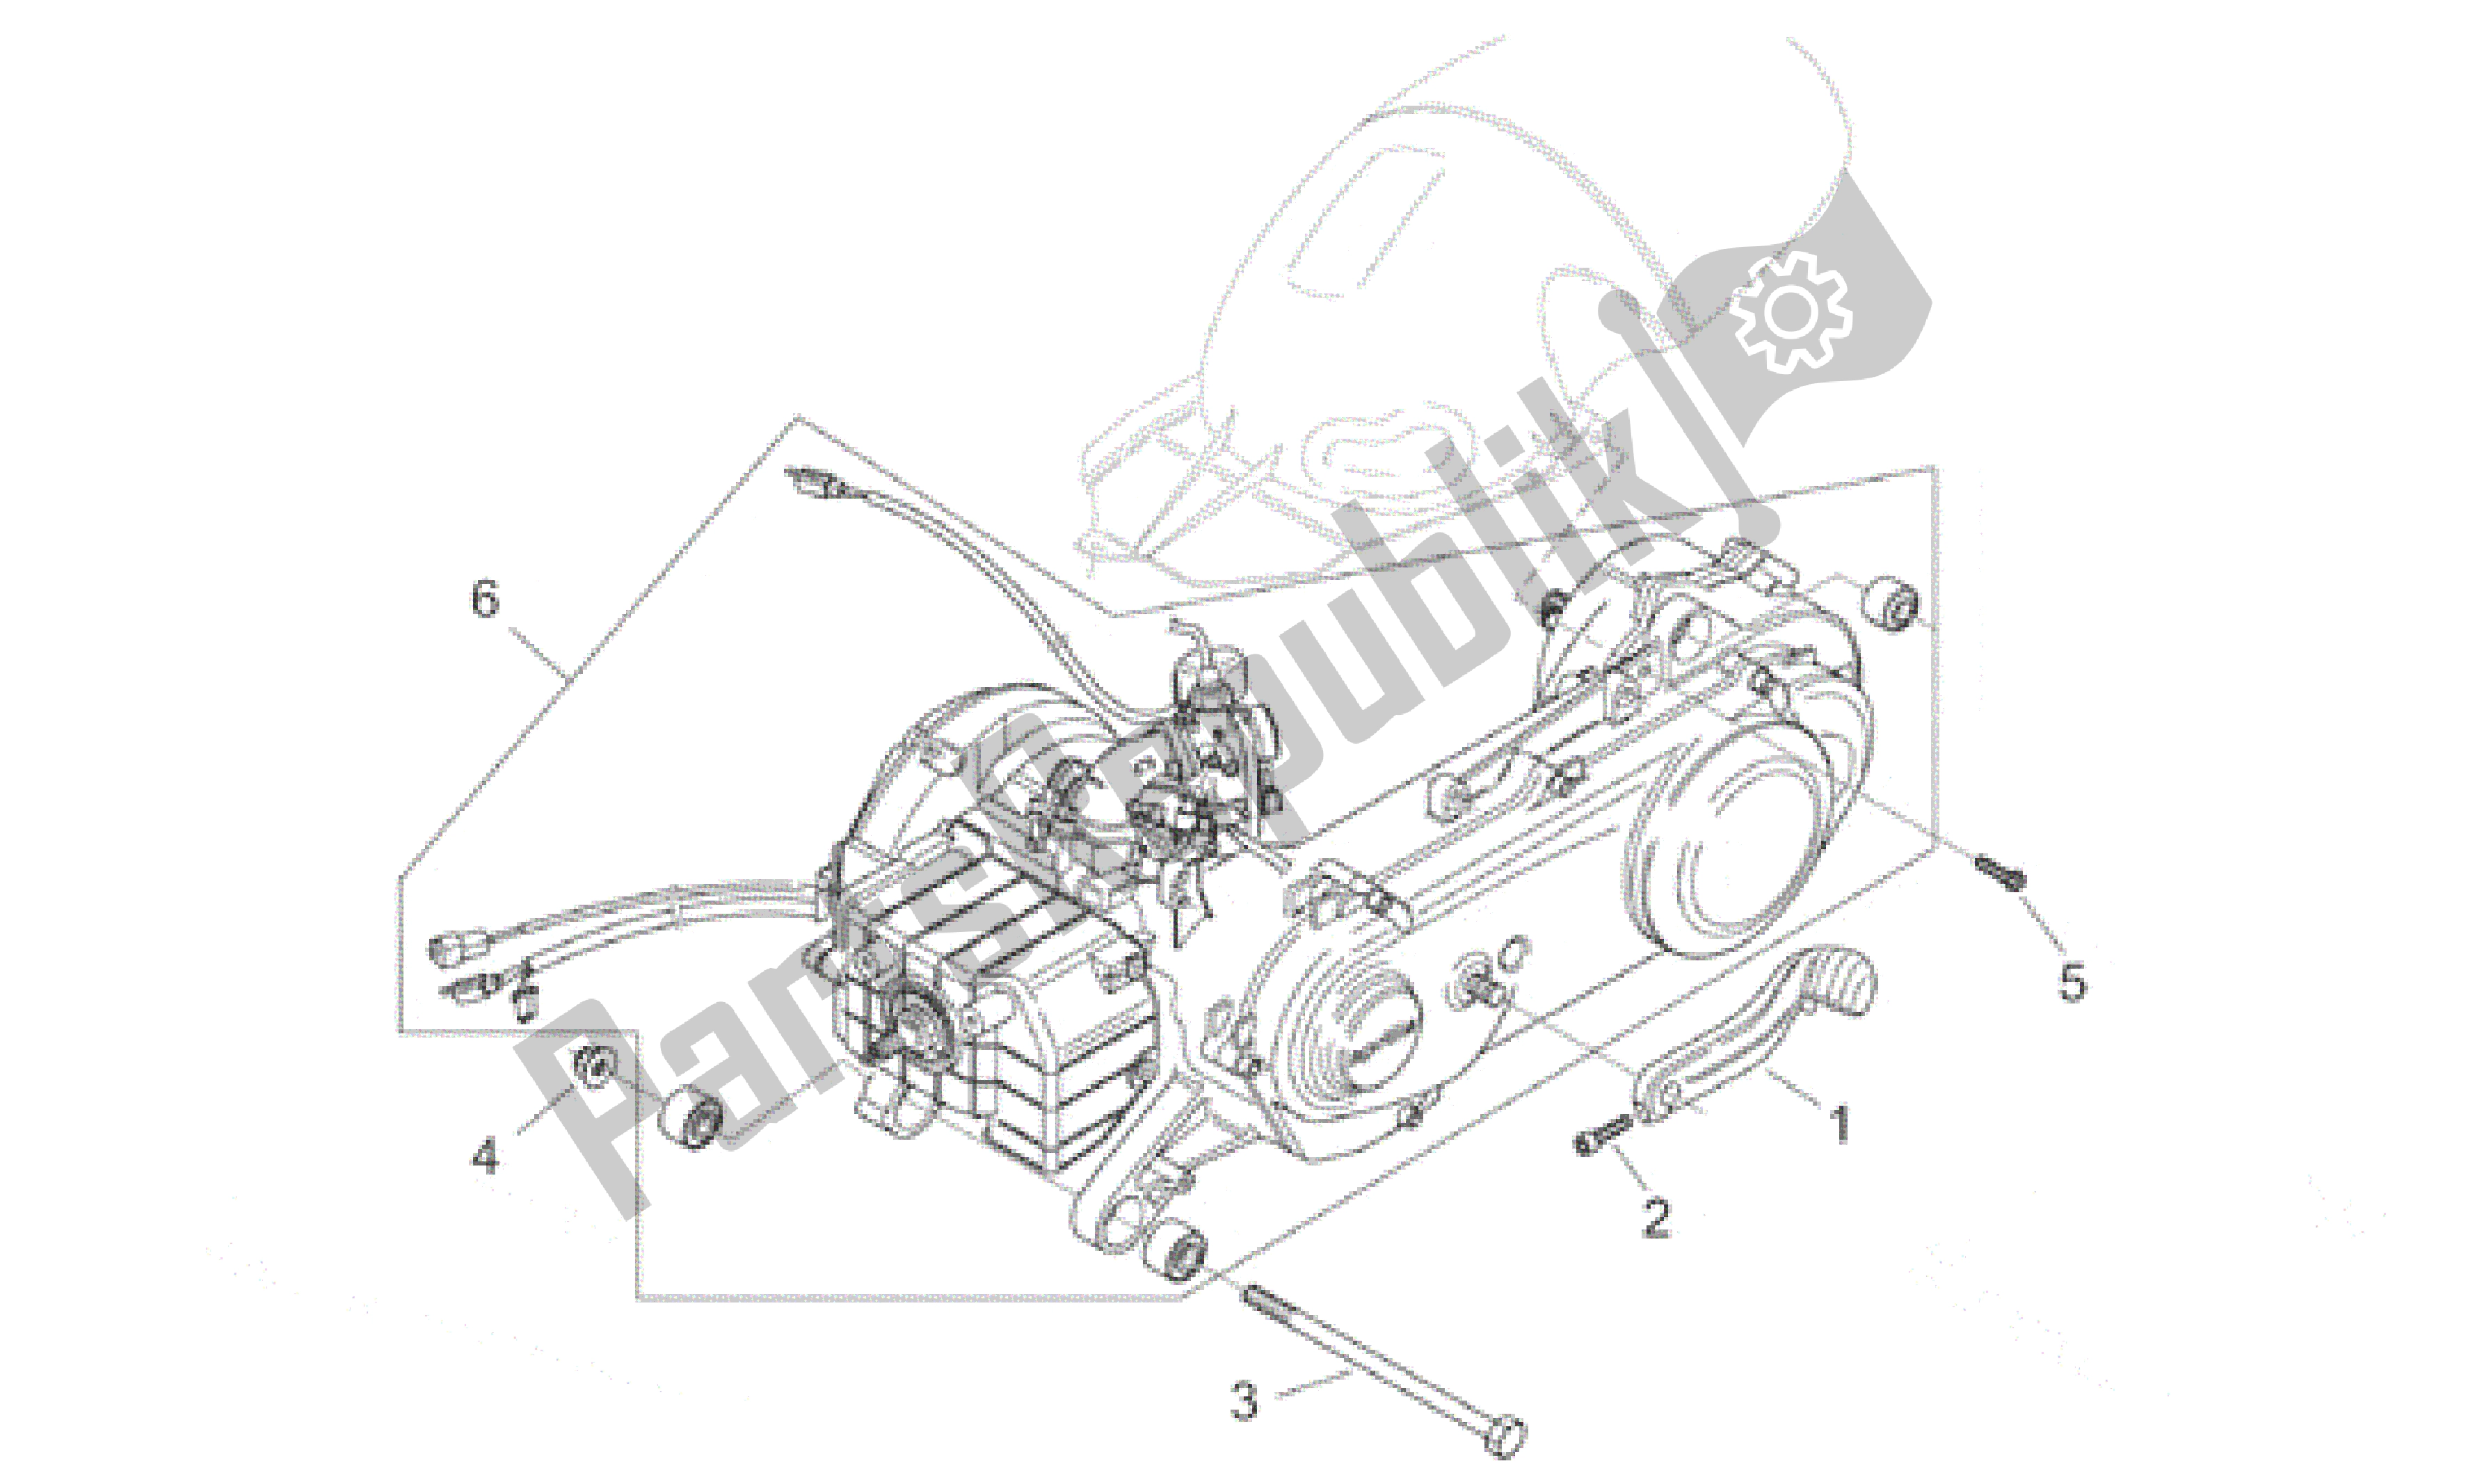 All parts for the Engine of the Aprilia Habana 50 1999 - 2001